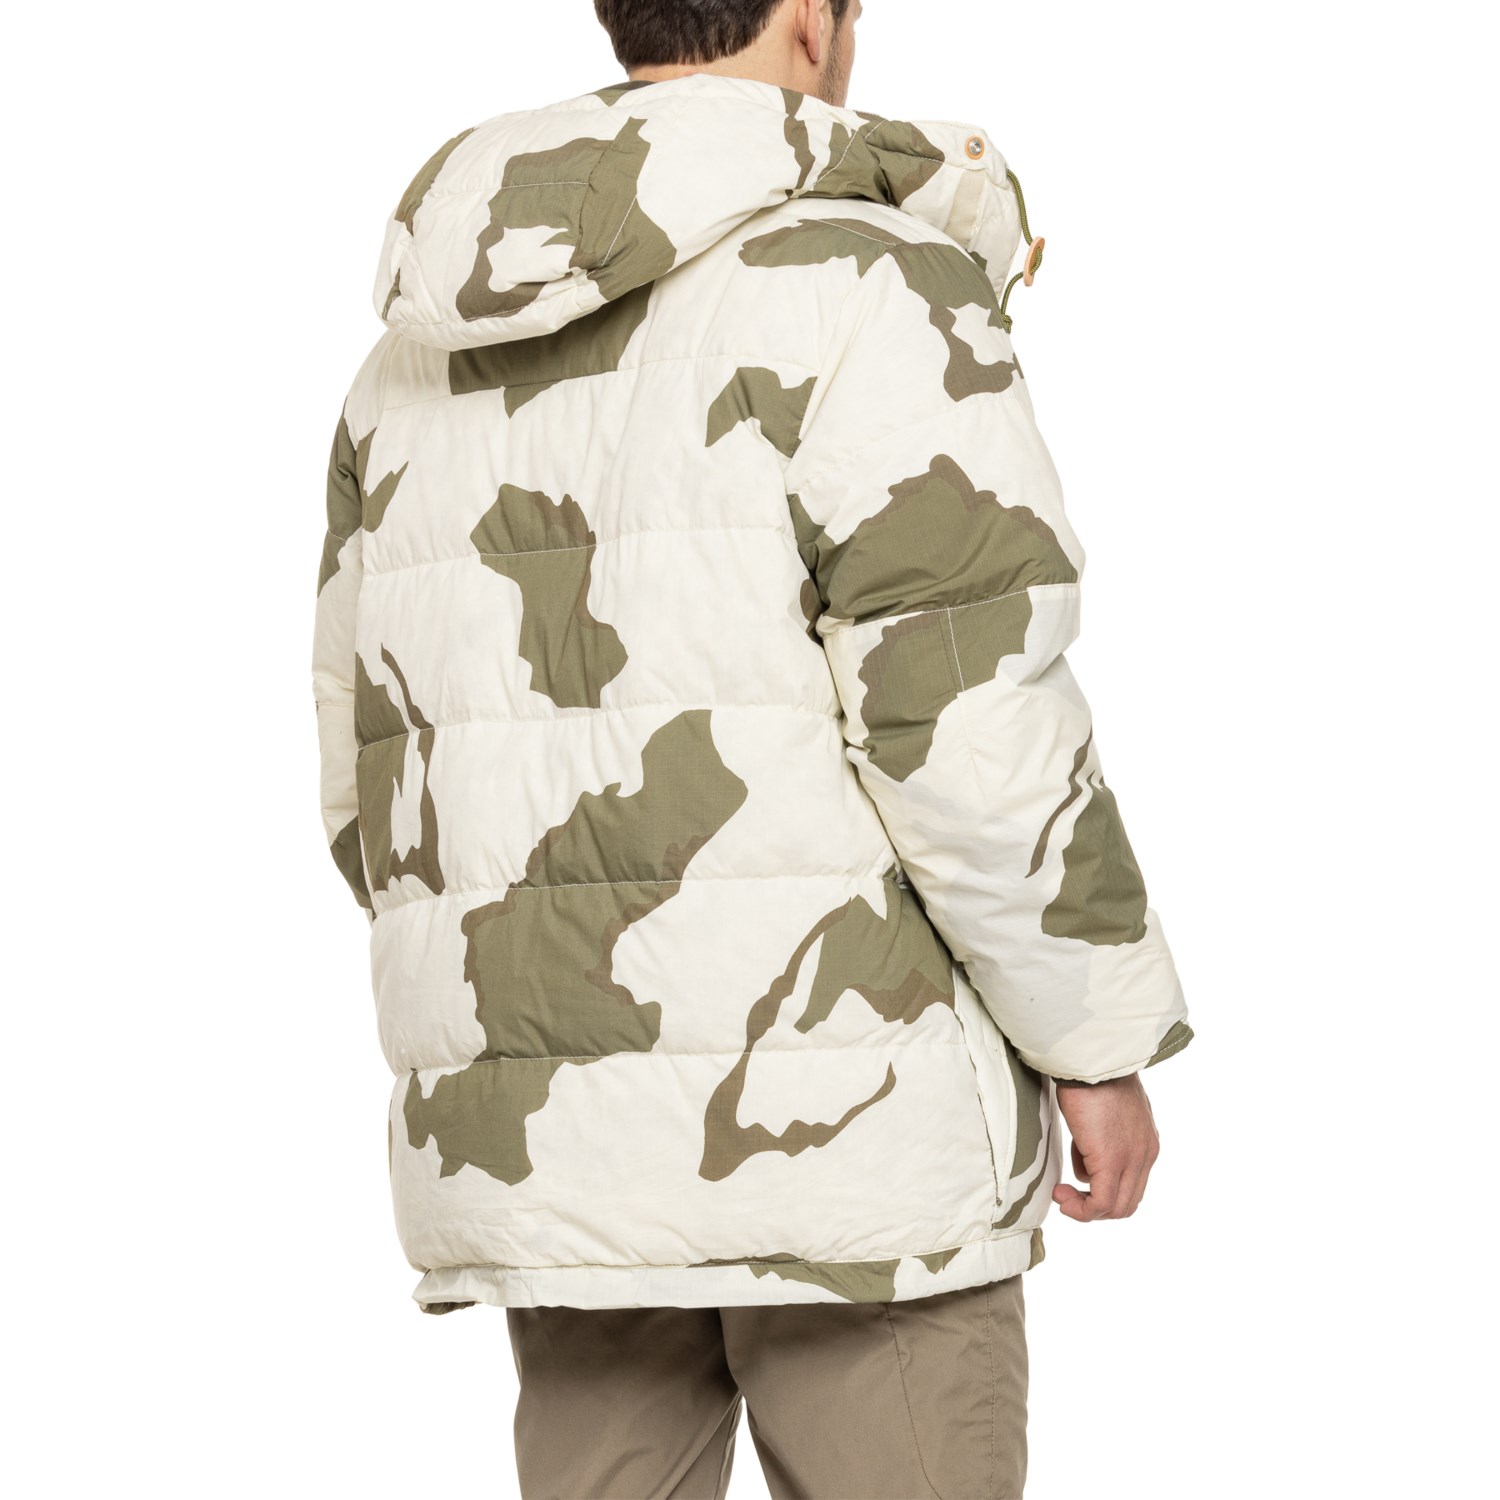 Filson Chilkoot Expedition Down Parka - 850 Fill Power - Save 66%